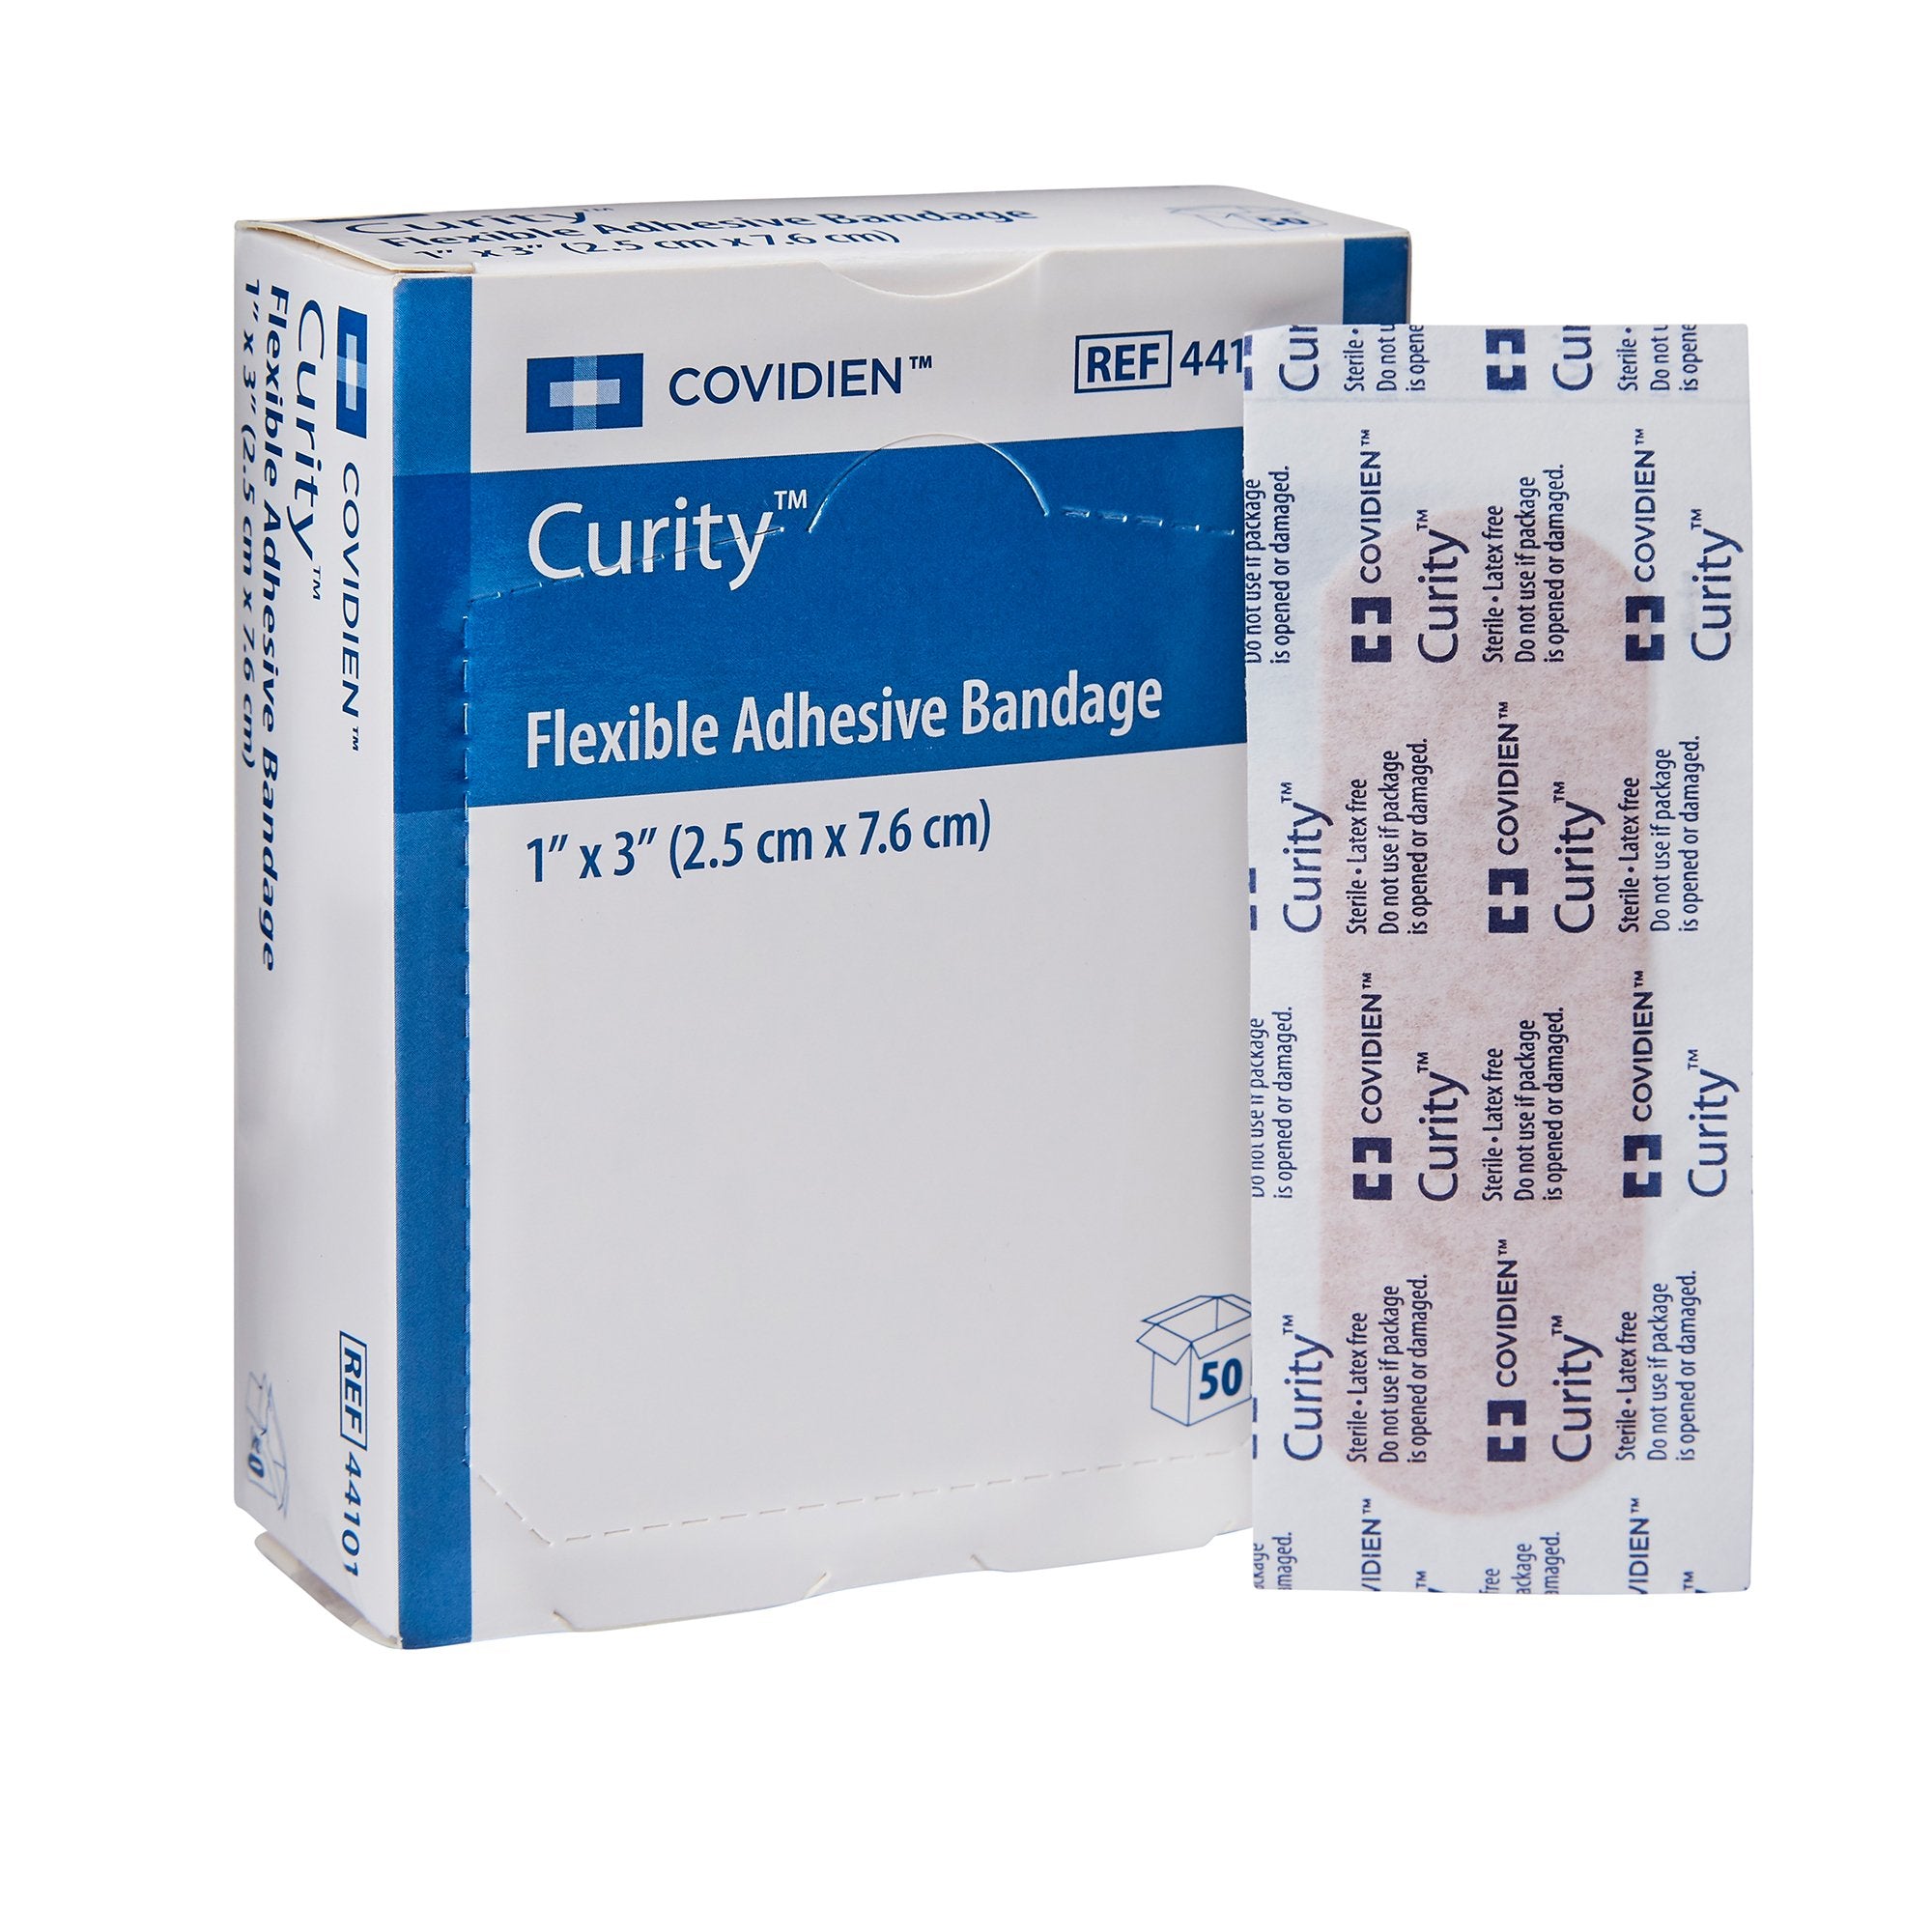 Adhesive Strip Curity™ 1 x 3 Inch Fabric Rectangle Bandage